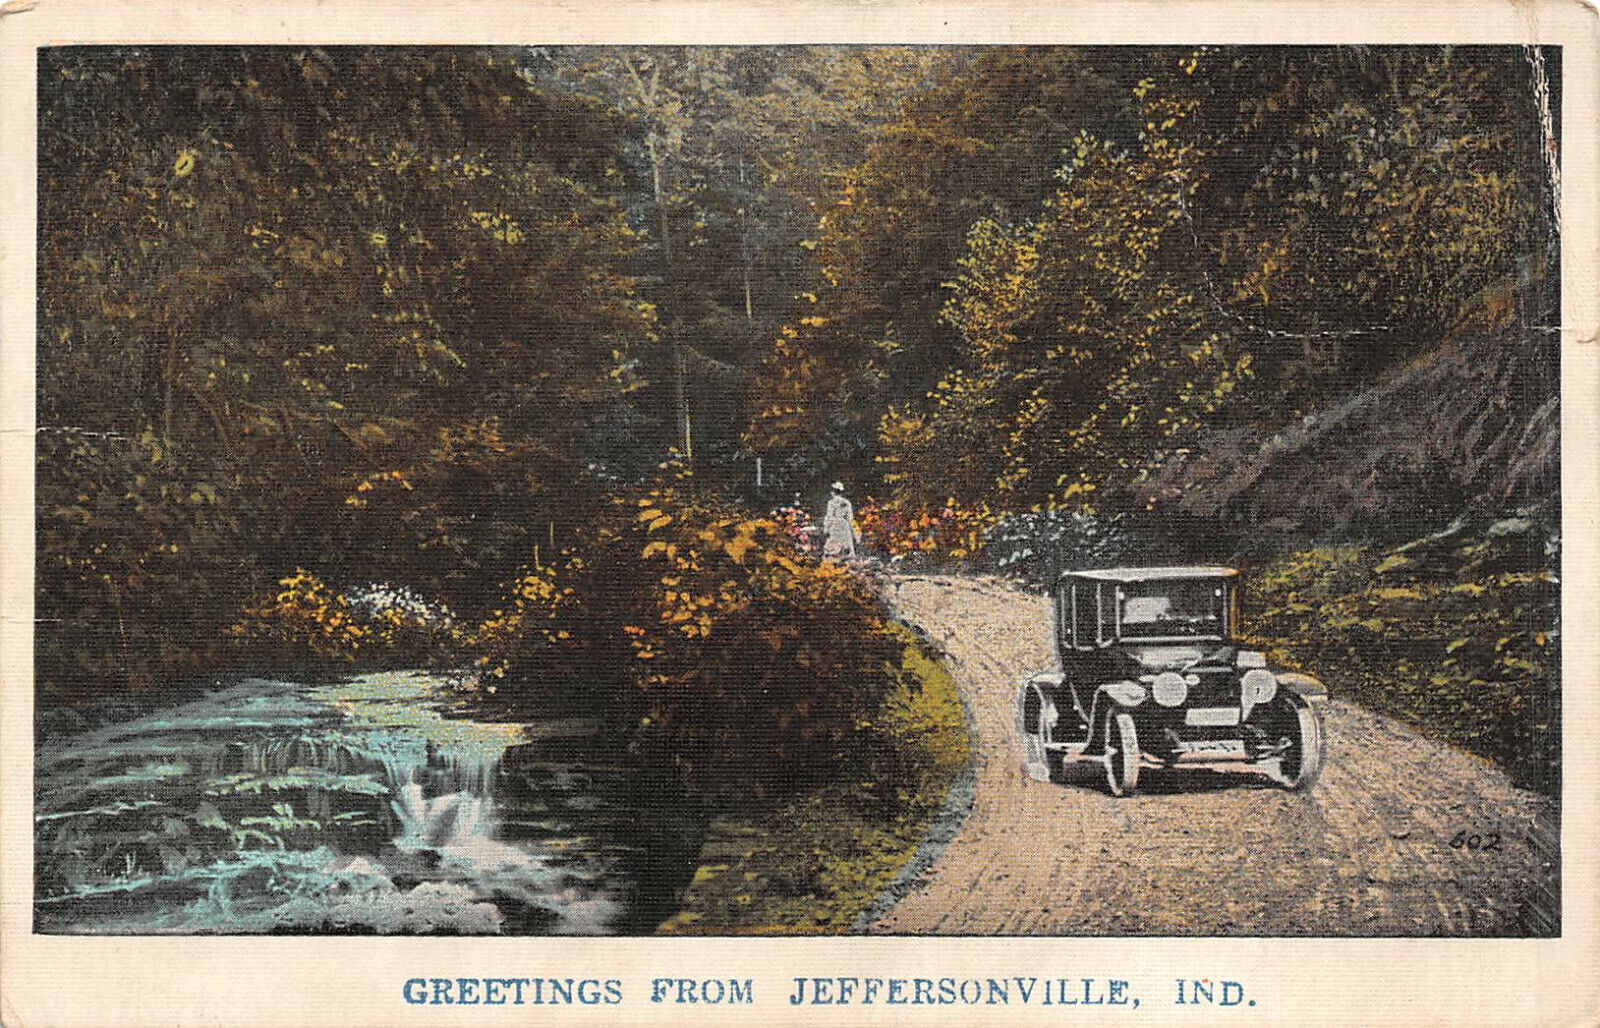 UPICK POSTCARD Greetings from Jeffersonville, Indiana c1910 Unposted - Old Car